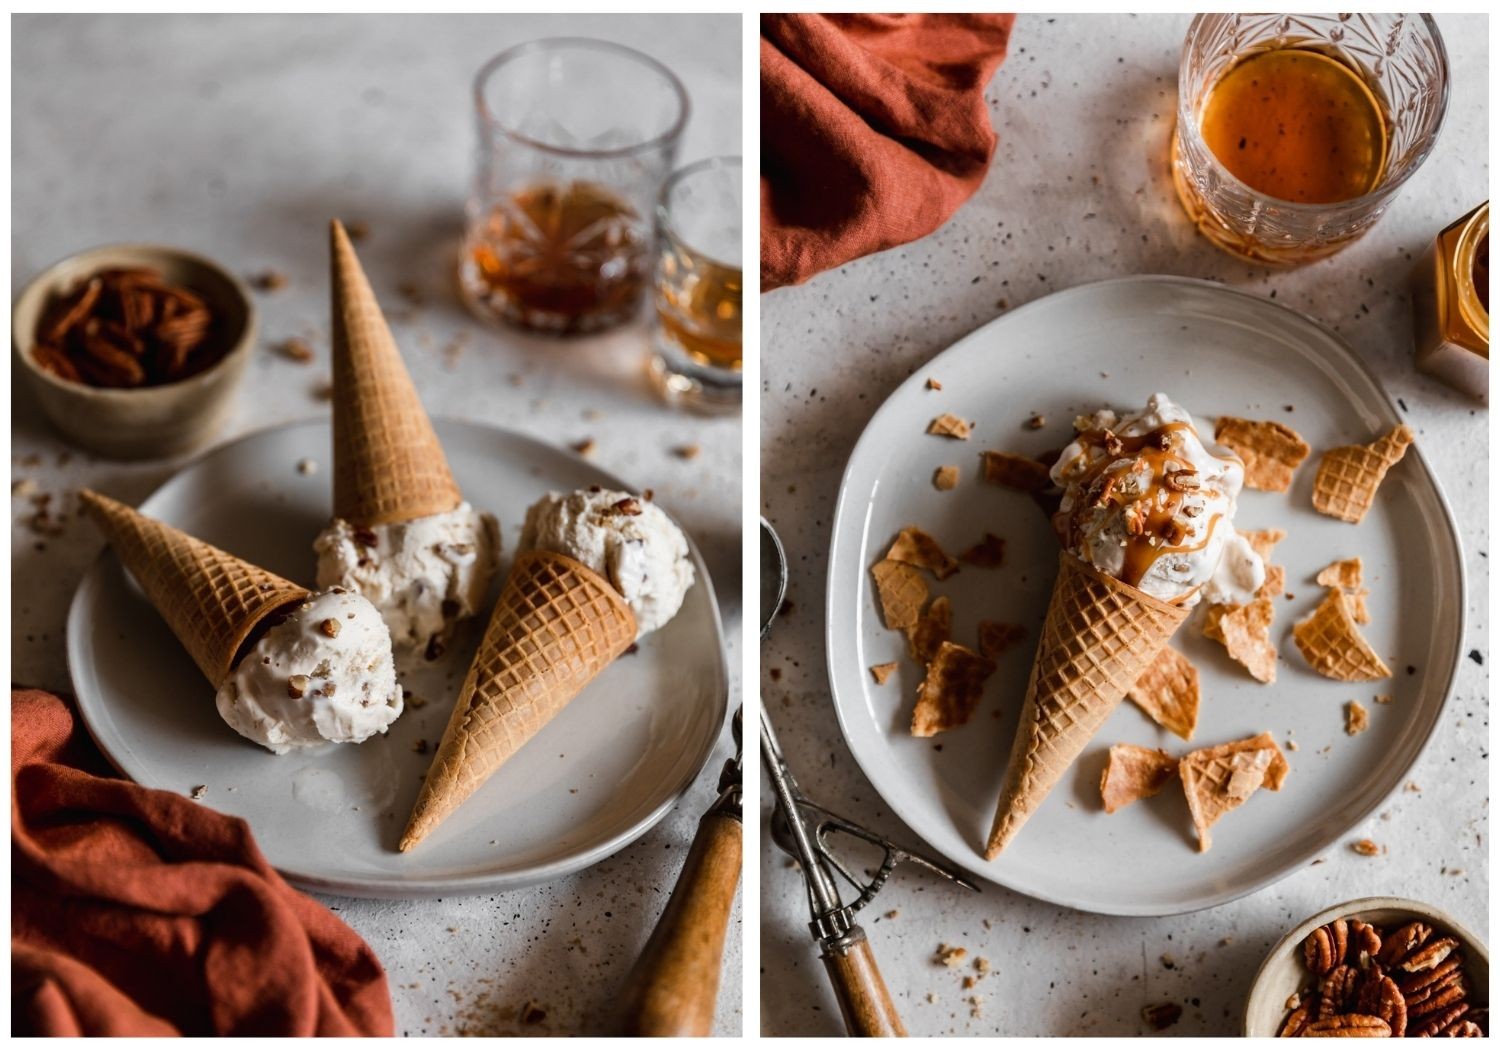 Two images; on the left, a side image of three ice cream cones with bourbon butter pecan ice cream on a white plate with two glasses of bourbon and a cream bowl of pecans in the background. The plate is partially placed on a burnt orange linen in the bottom left corner with a white background. On the right, an overhead of an ice cream cone topped with caramel and pecans on a white plate on a white counter. Next to the plate is an orange linen, glass of bourbon, jar of caramel, and vintage ice cream scoop.